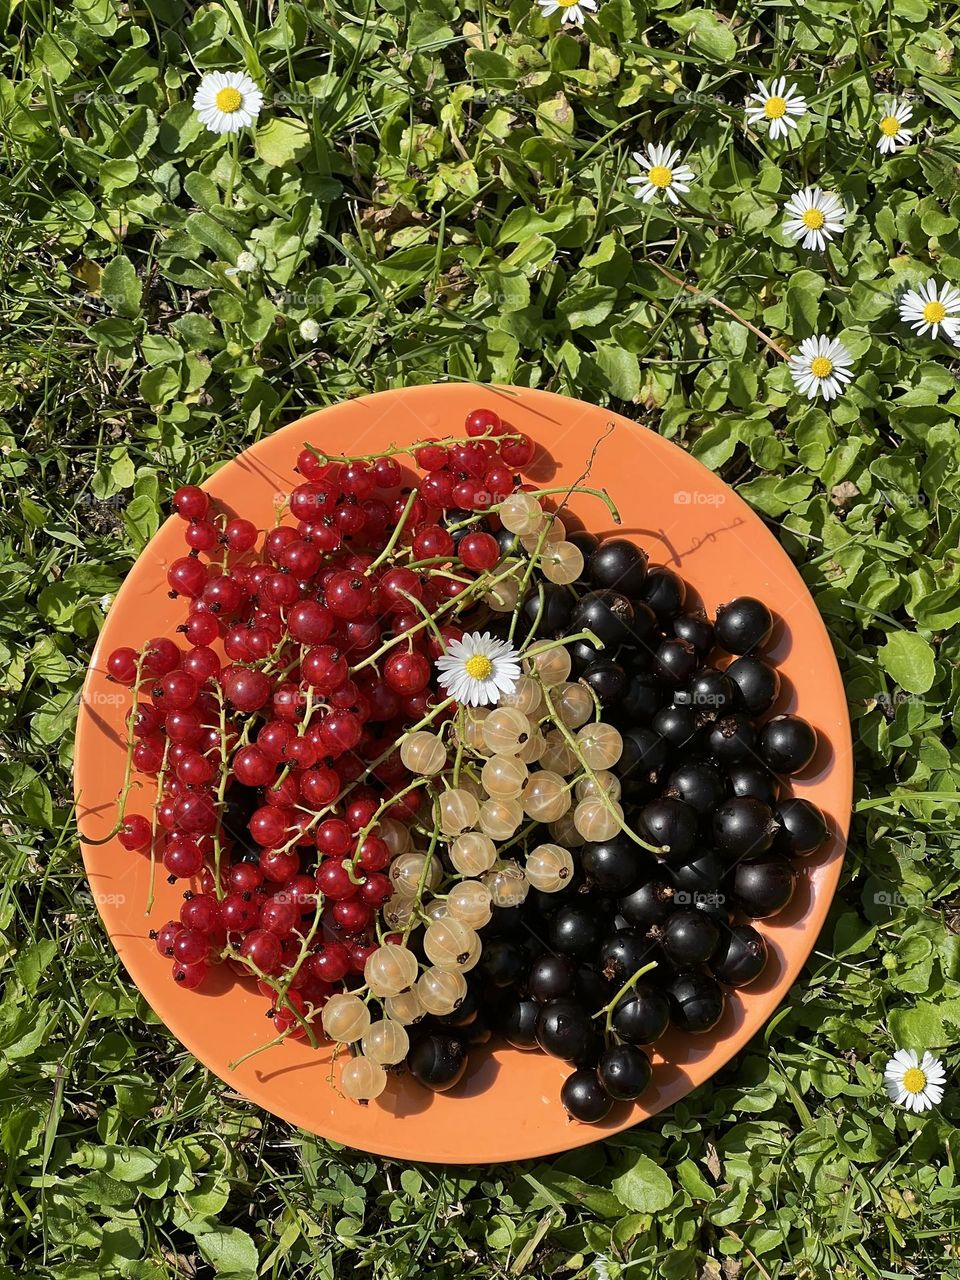 Nice Sunny summer day. Delicious garden berries. Red, white, black currant. Summer mood. Authentic mobile photography.